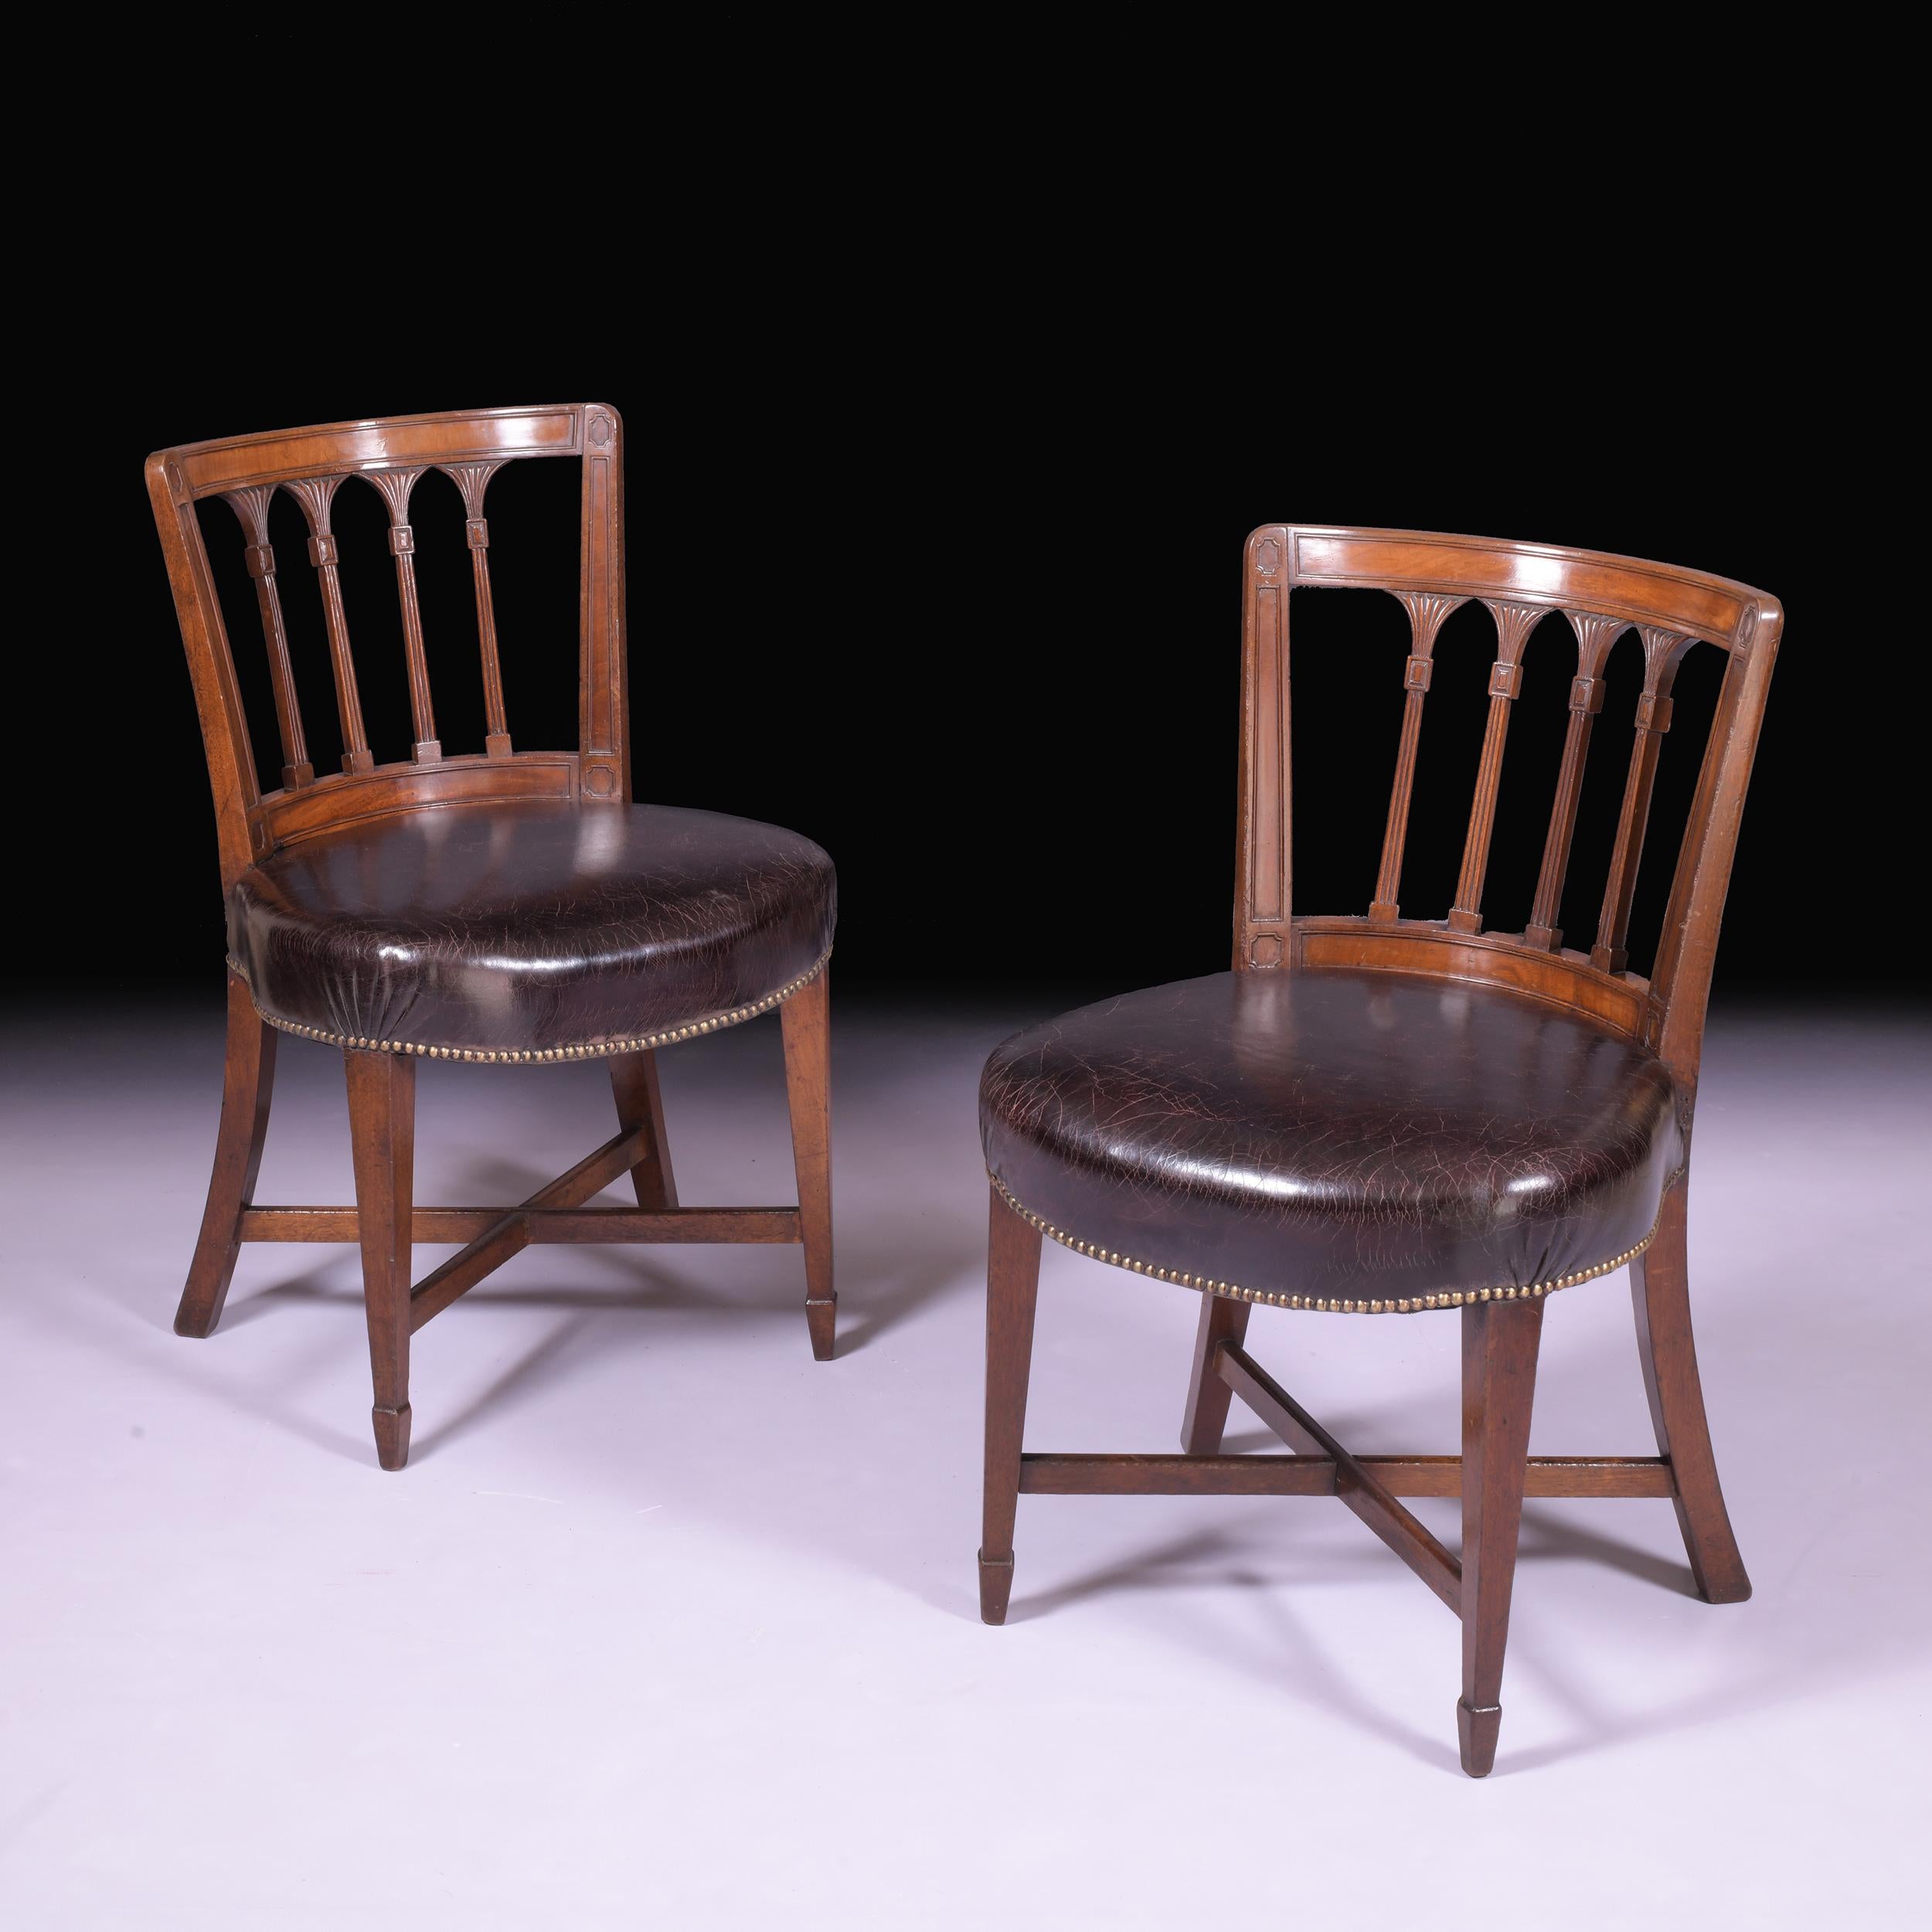 A stunning pair of Regency mahogany side chairs attributed to Gillows of Lancaster, each moulded curved back with pierced fluted rail backs above leather stuff-over seats and brass close nail decorated rails, raised on square tapering front legs and